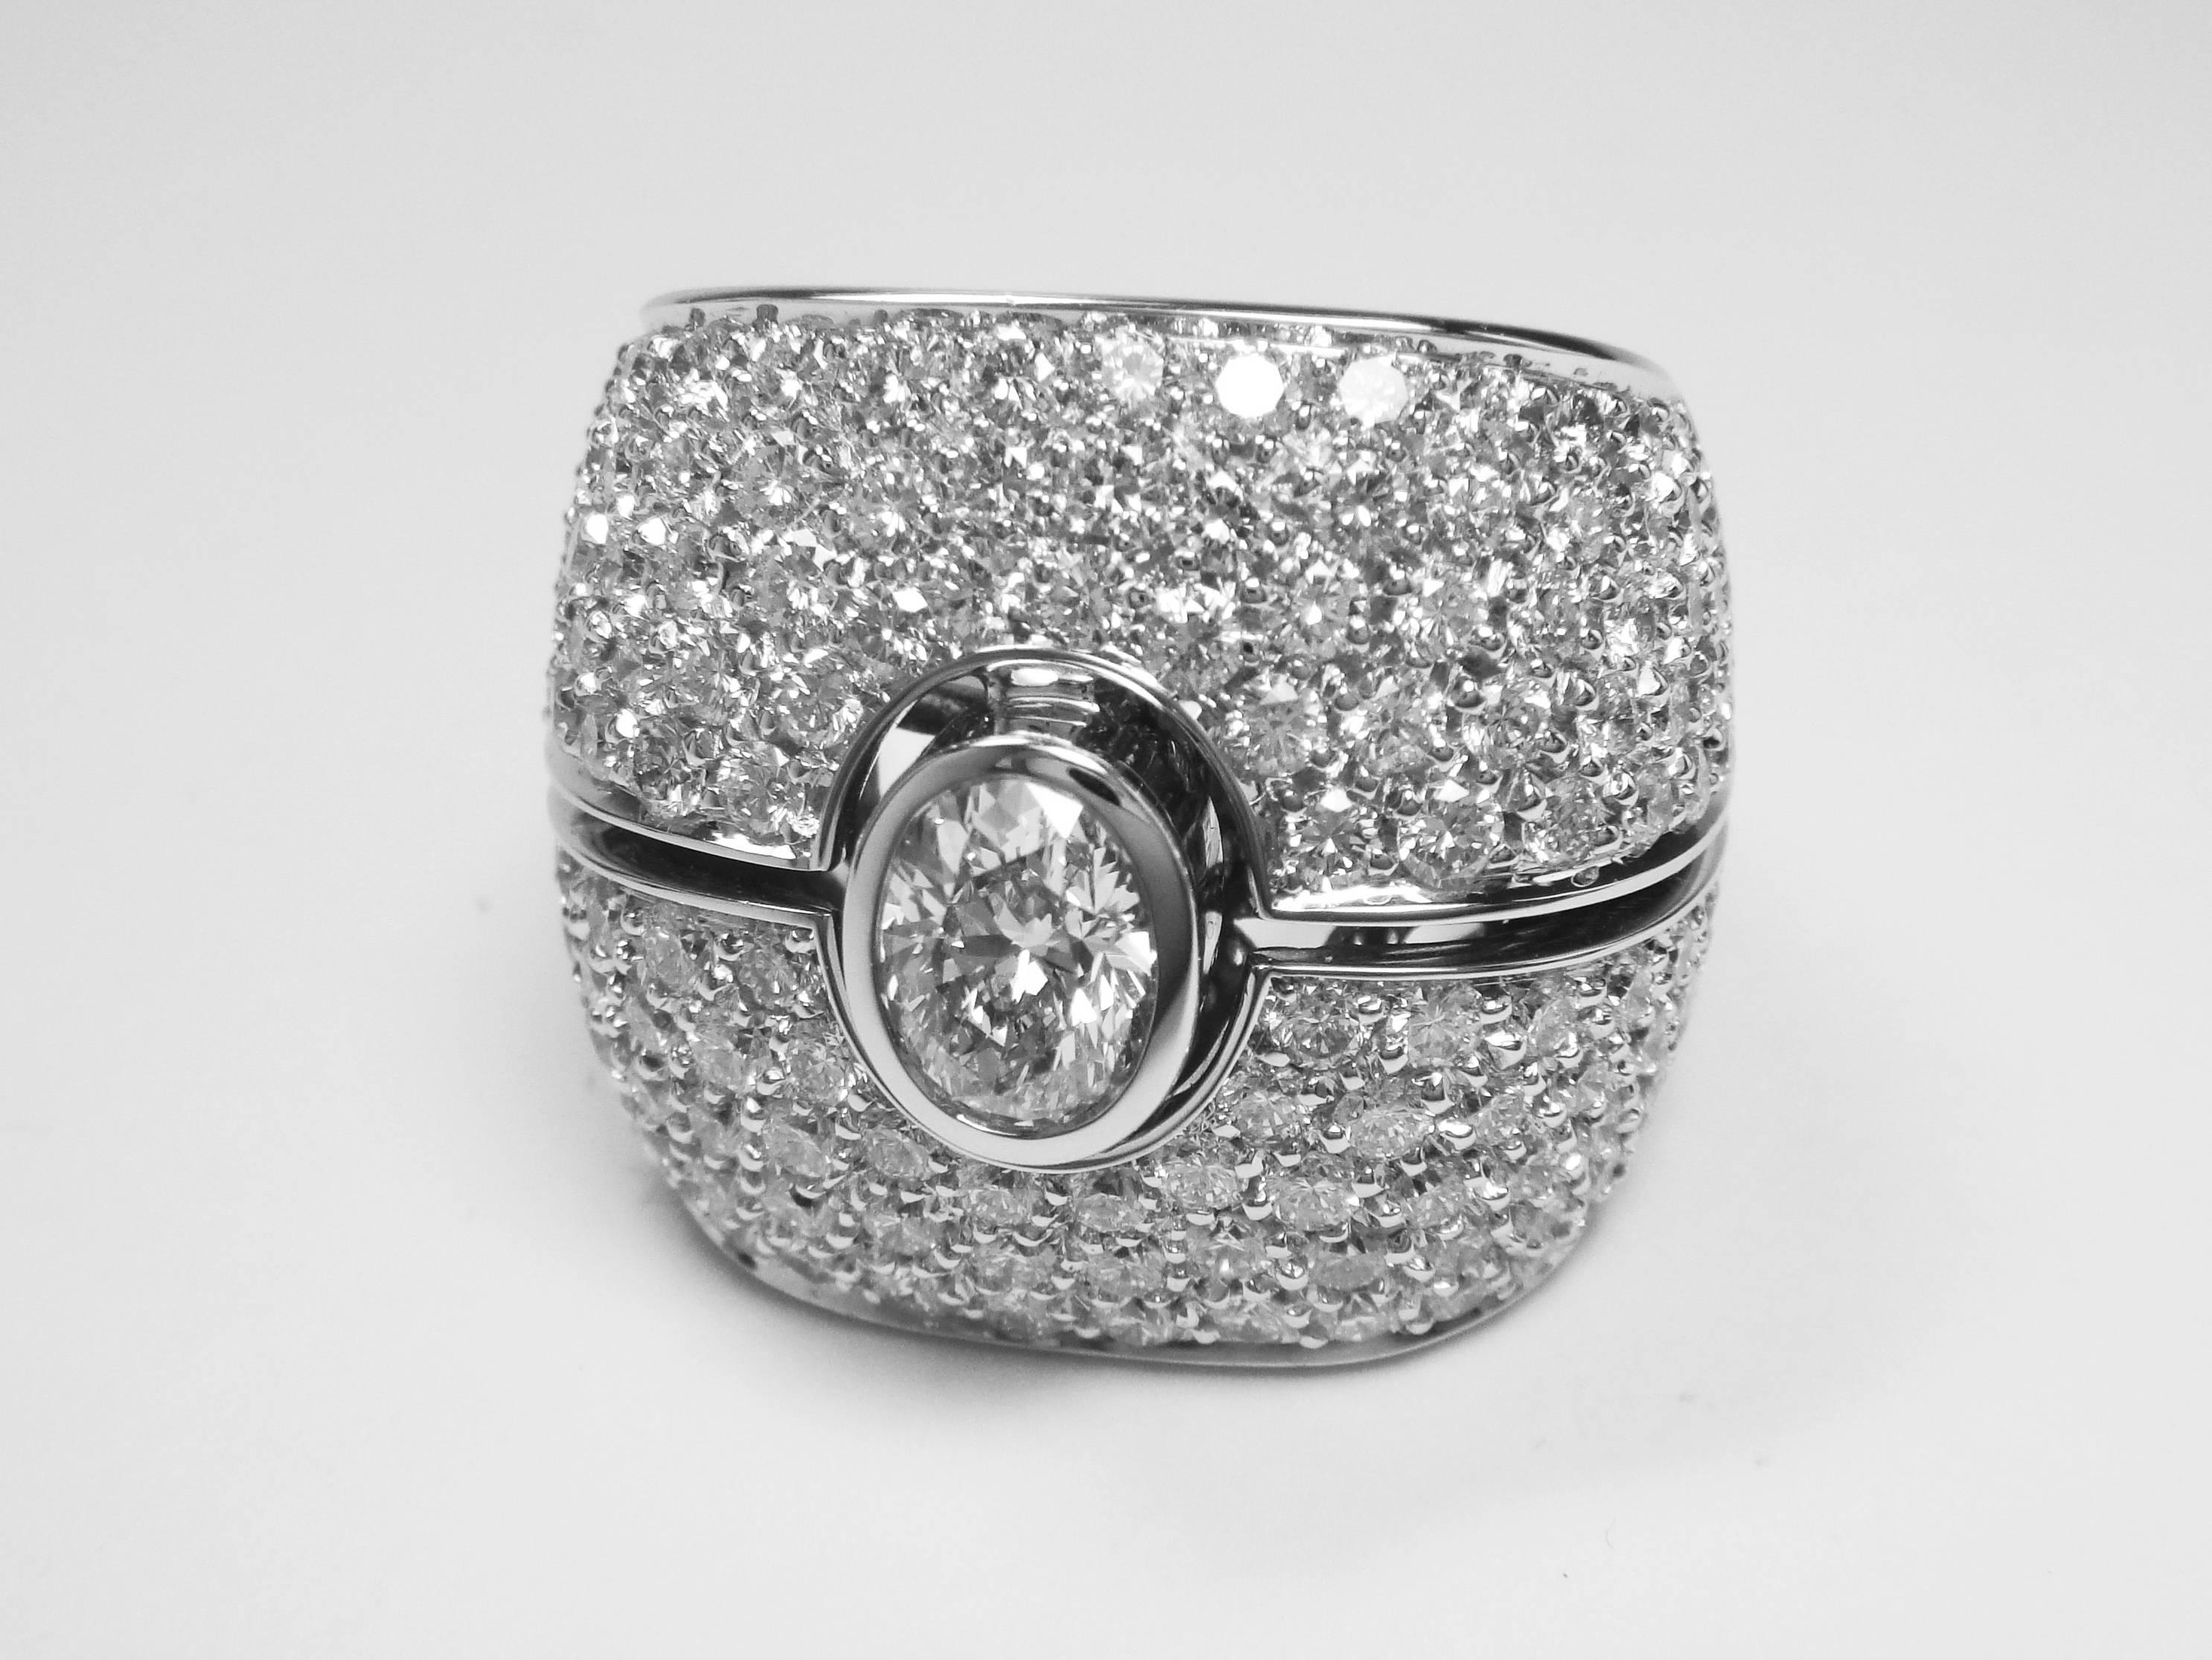 This ring is oval-shaped and exhibits 4.13 carats total weight of dazzling pavé setting diamonds, and a central oval shape diamond with 0.90 carat, all mounted on white gold. For its oval shape in an XL size this is certainly a statement piece.
This